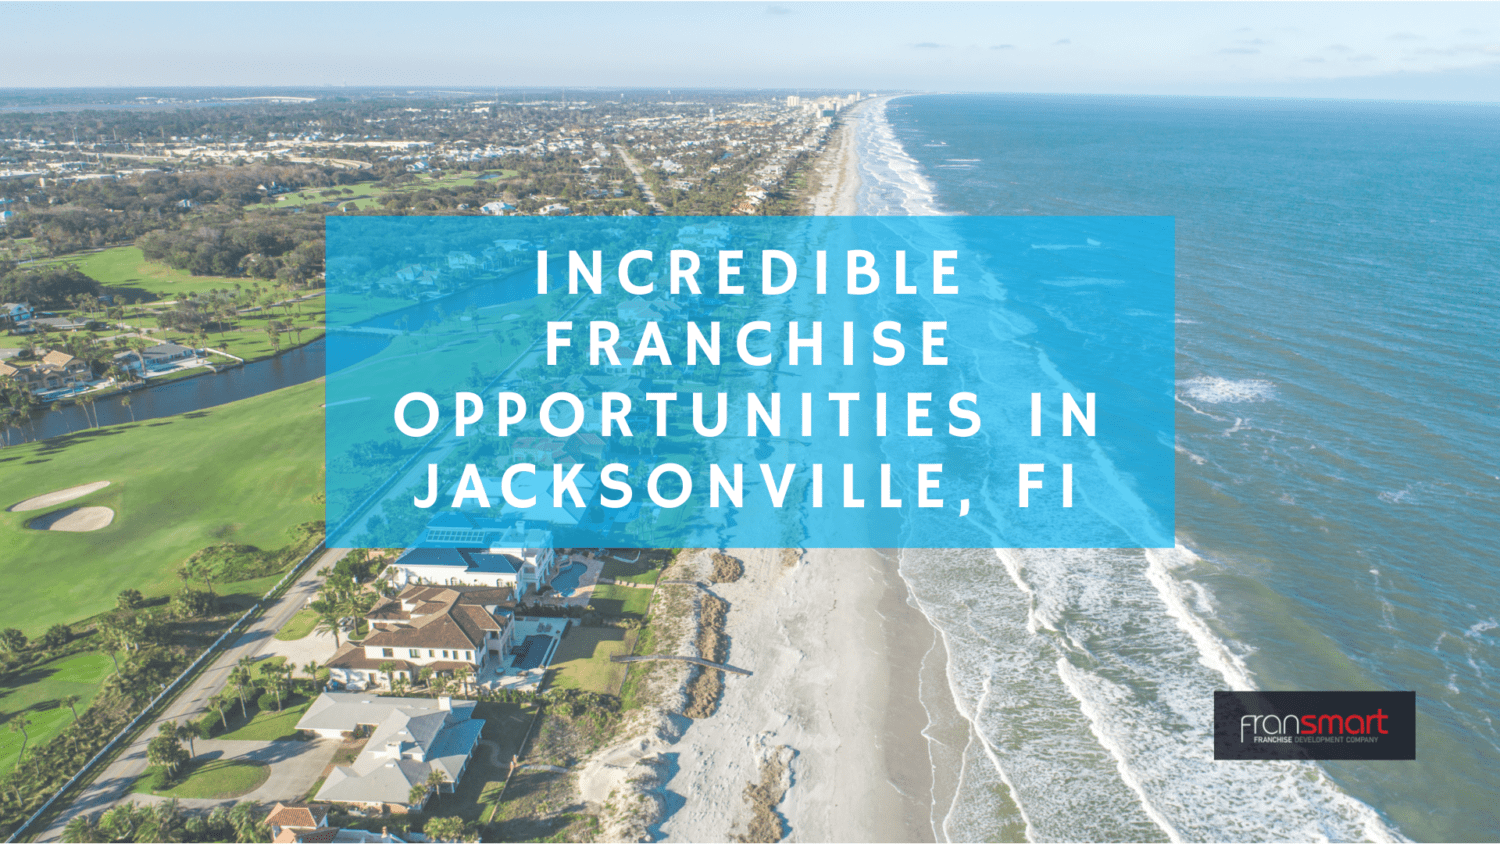 5 Incredible Franchise Opportunities in Jacksonville, FI